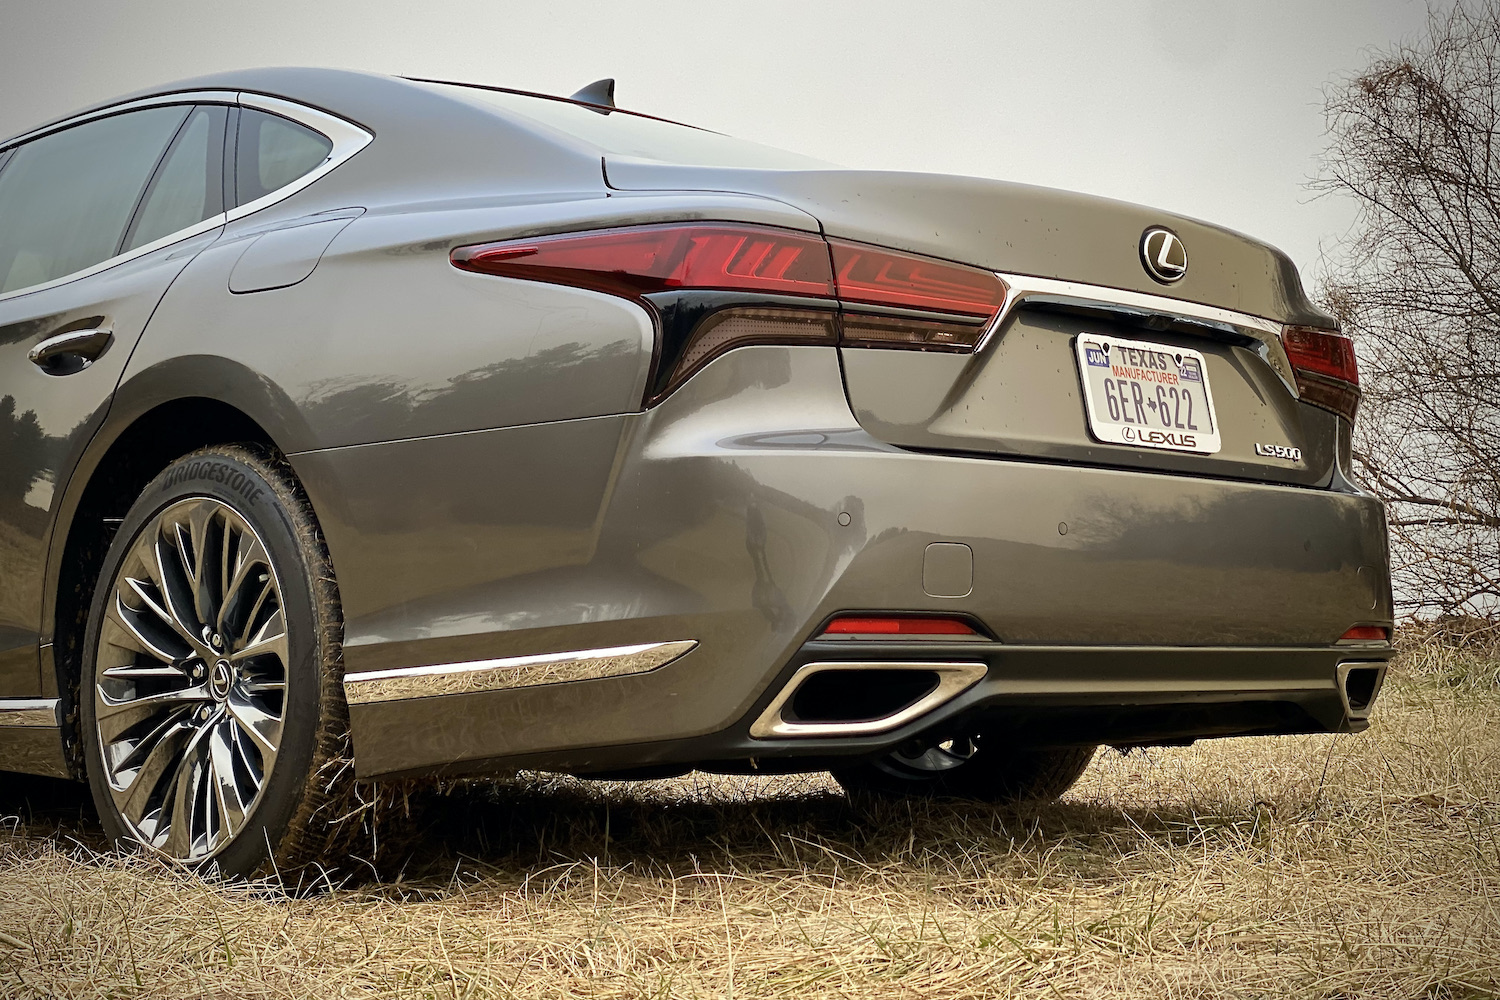 A close-up of the 2021 Lexus LS500's rear end from driver's side in a grassy field.